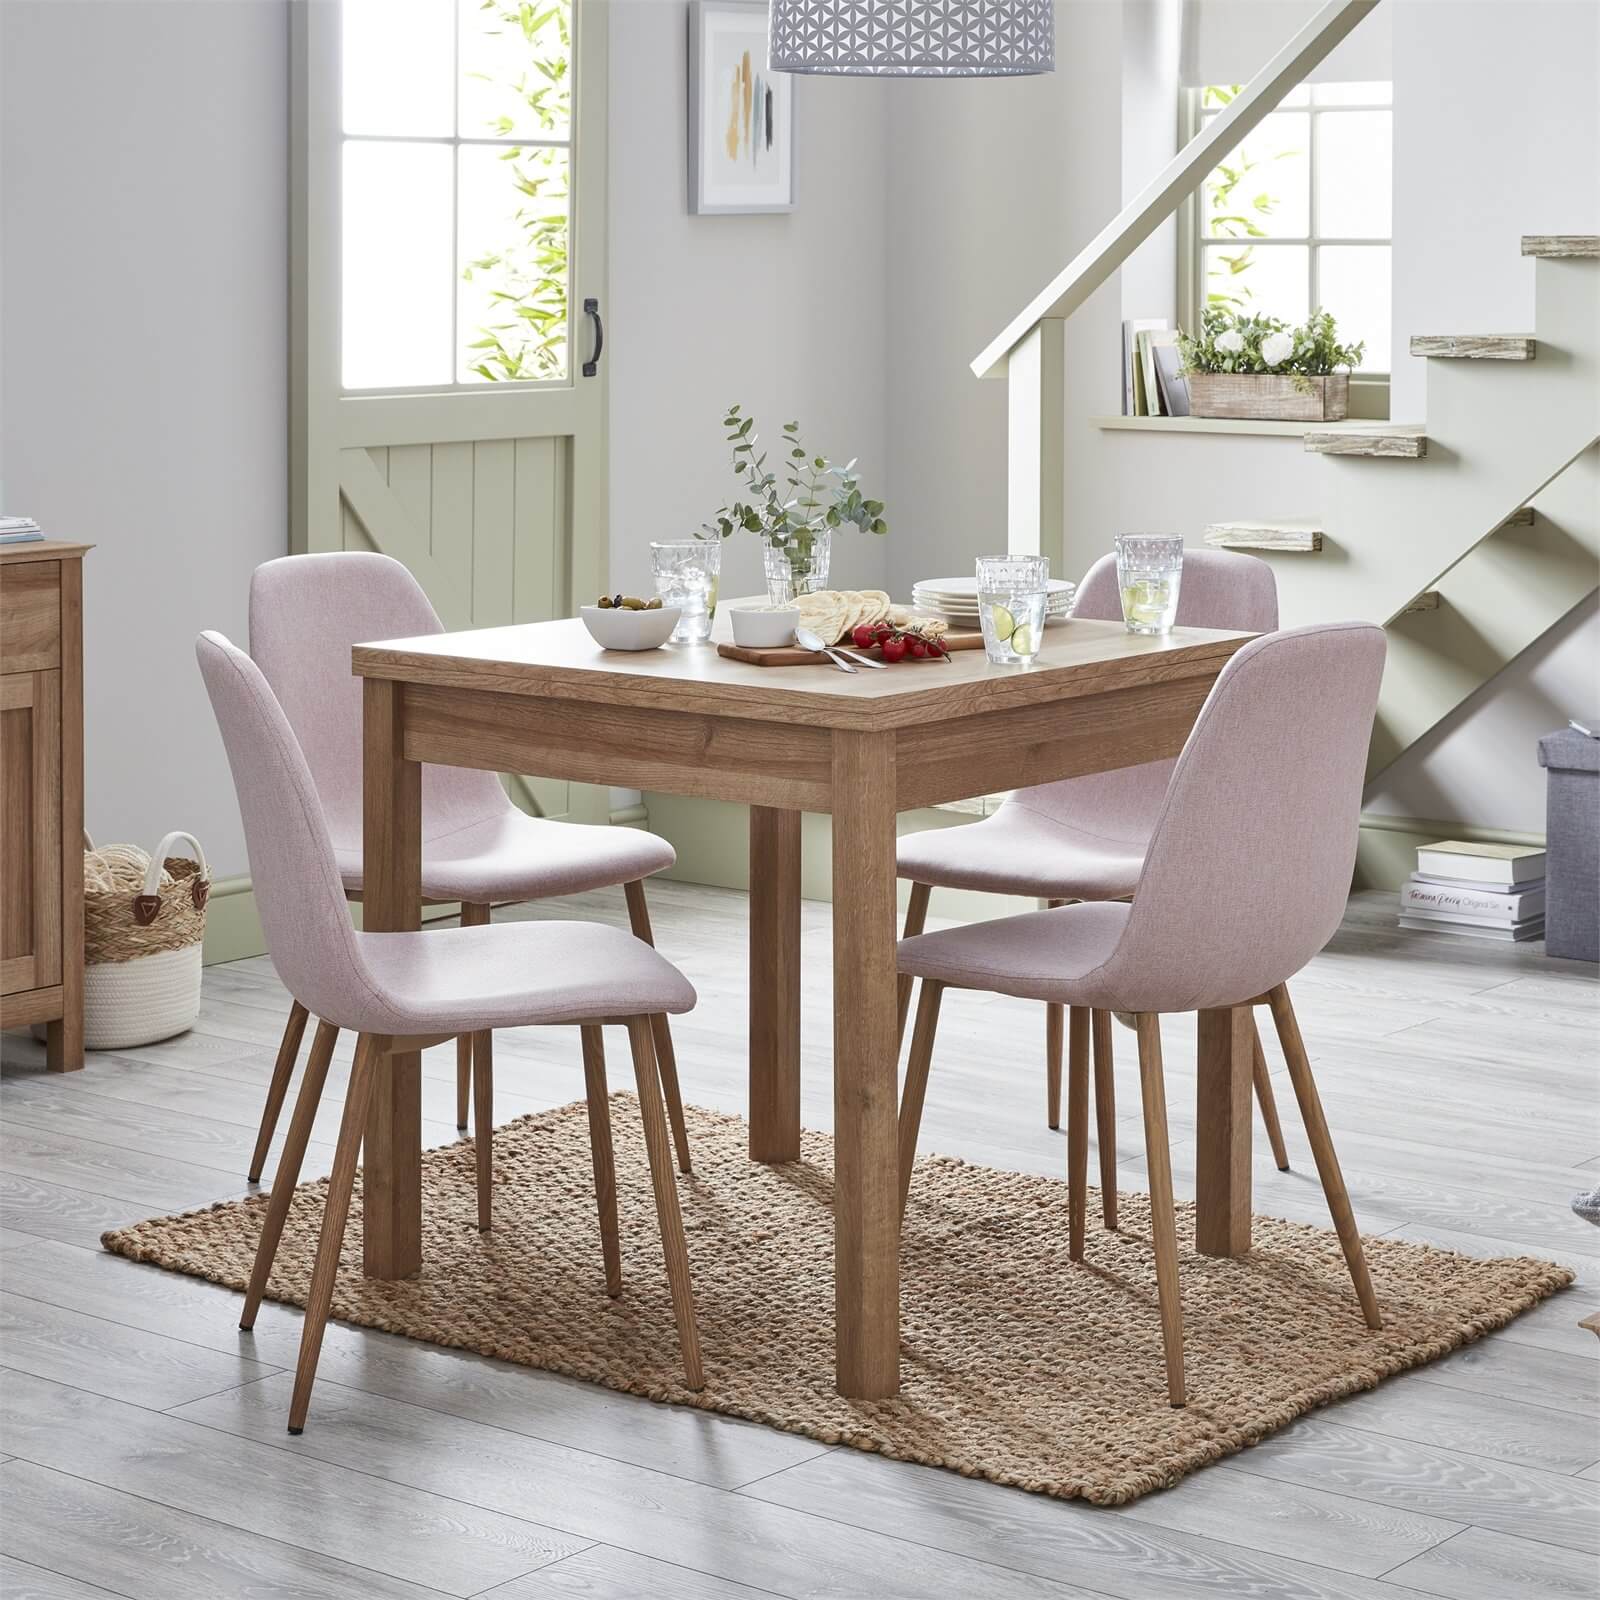 Ludlow Upholstered Dining Chair - Set of 2 - Dusky Pink